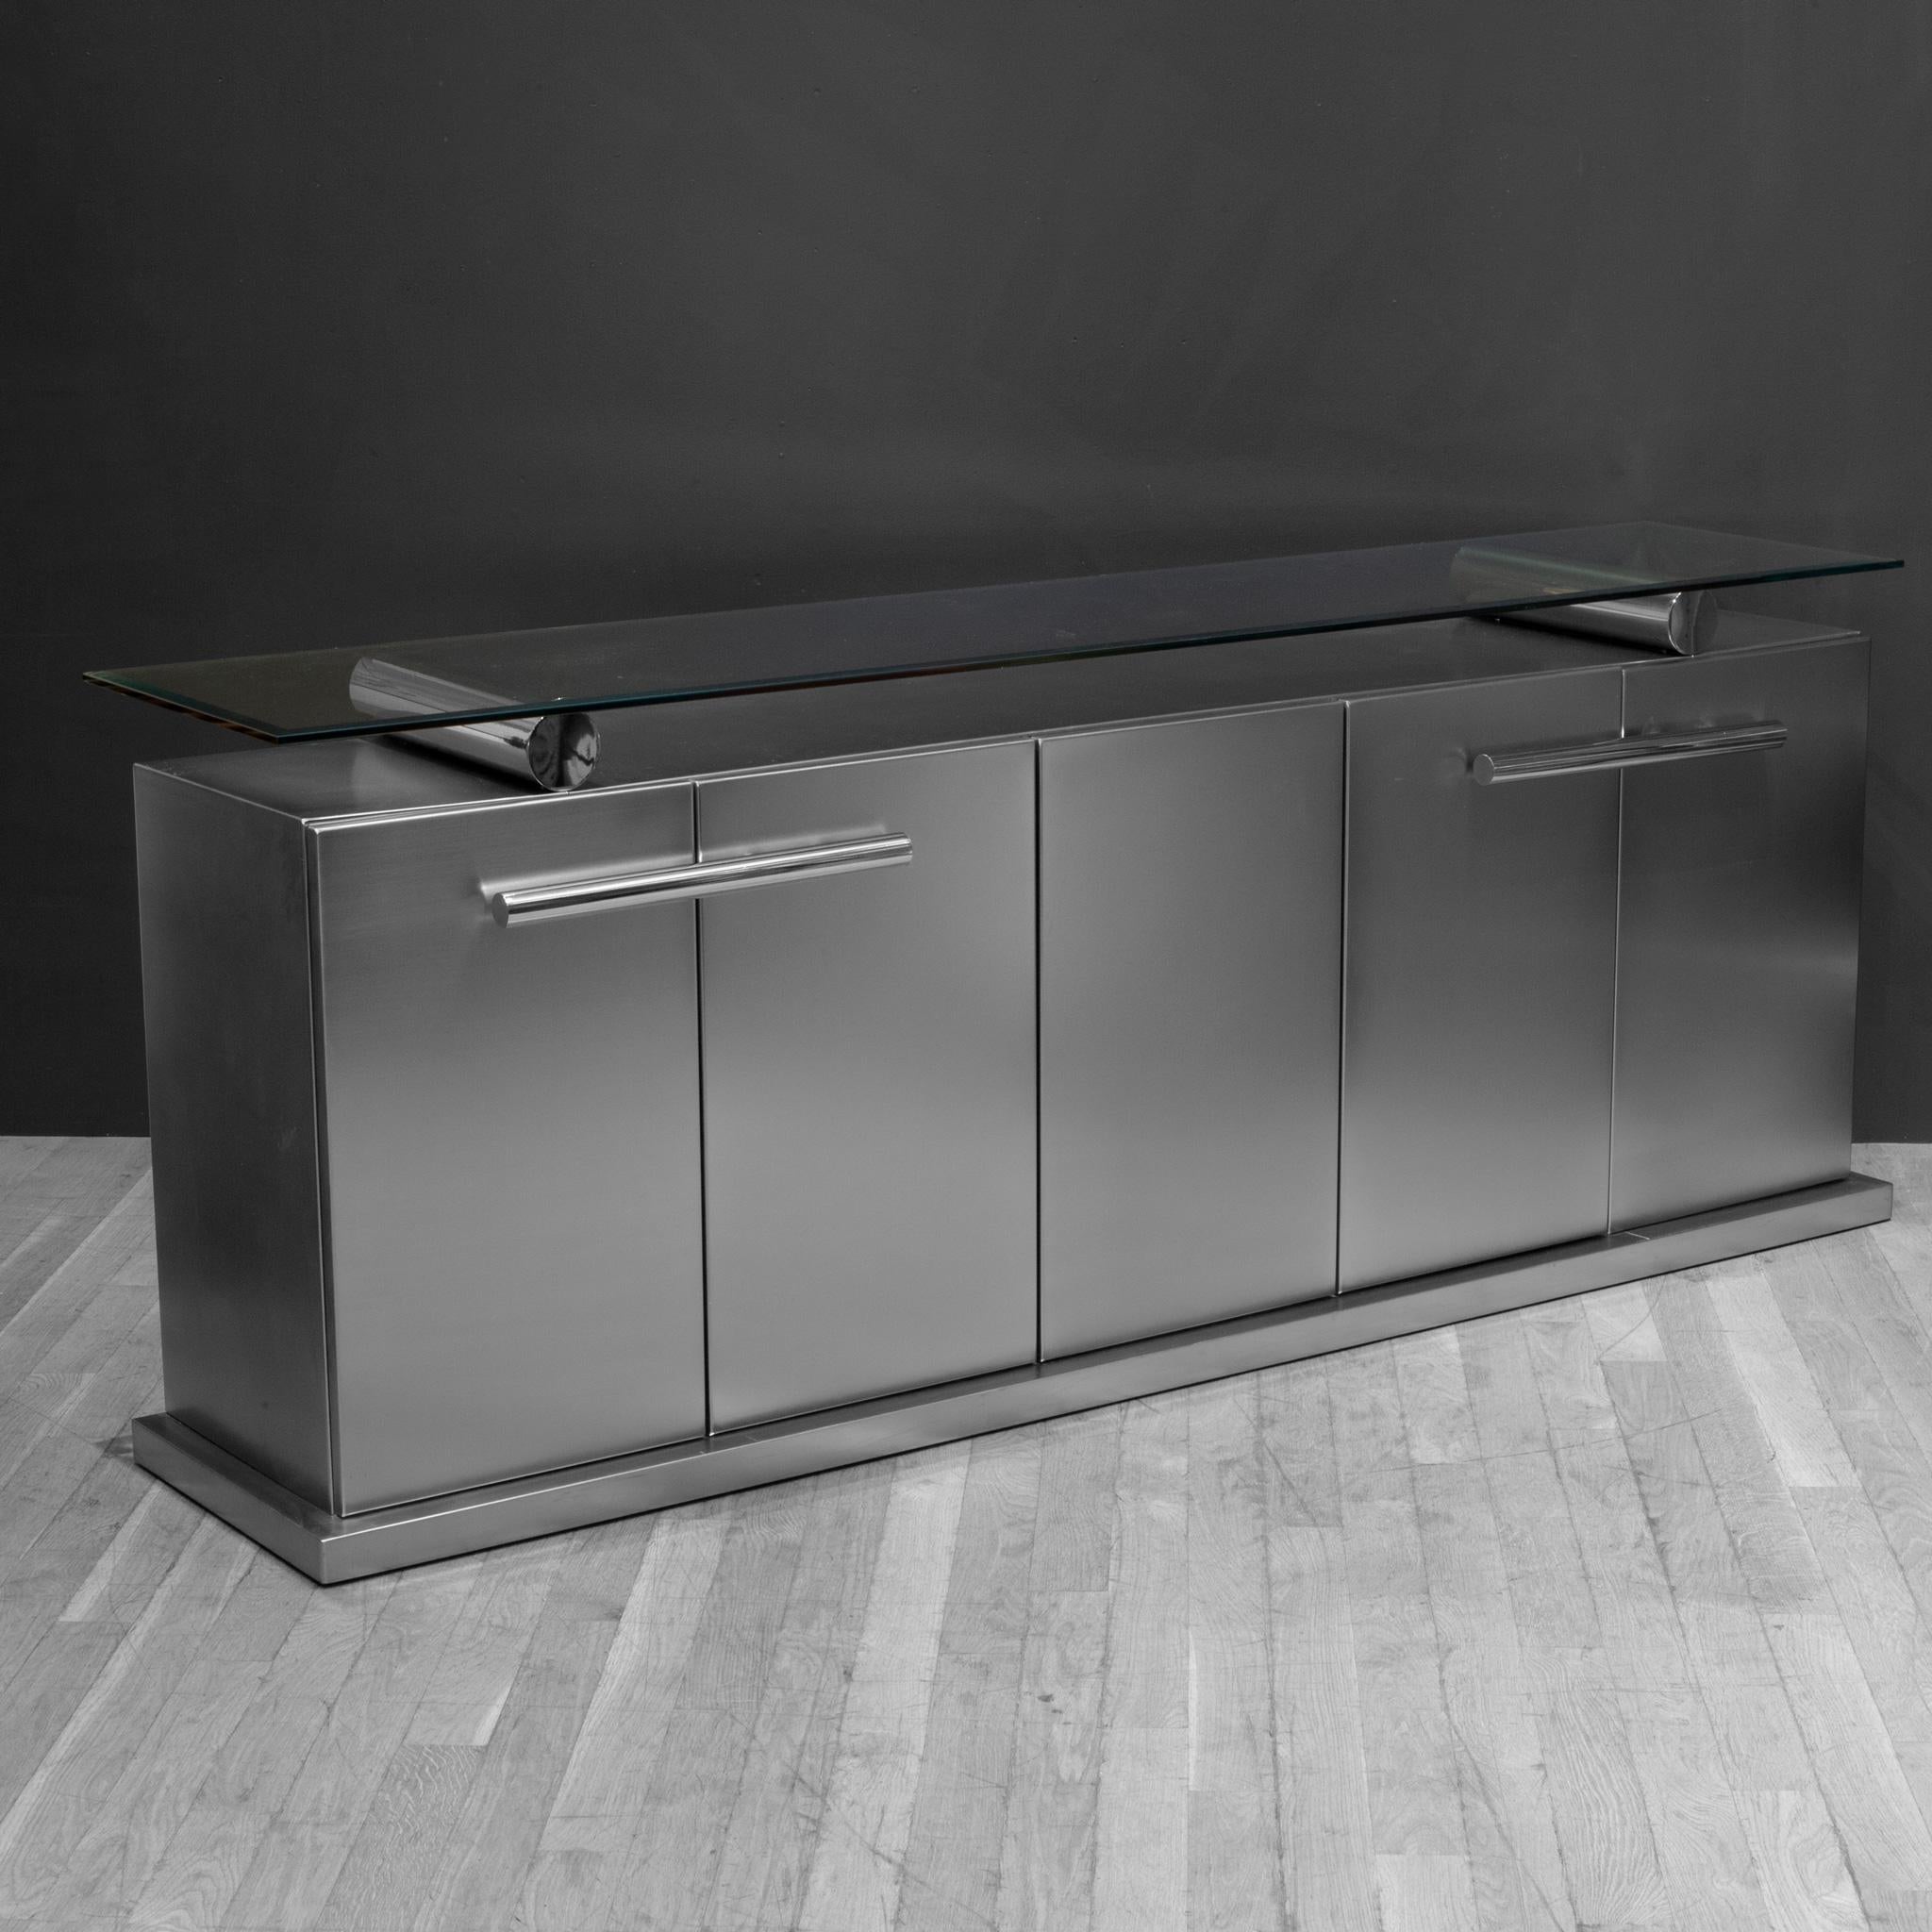 ABOUT

For more affordable shipping options, please contact S16 Home San Francisco. 

Belgo Chrome sideboard in brushed stainless steel with round chrome handles and round glass supports and a thick floating glass top.  The five door sideboard has